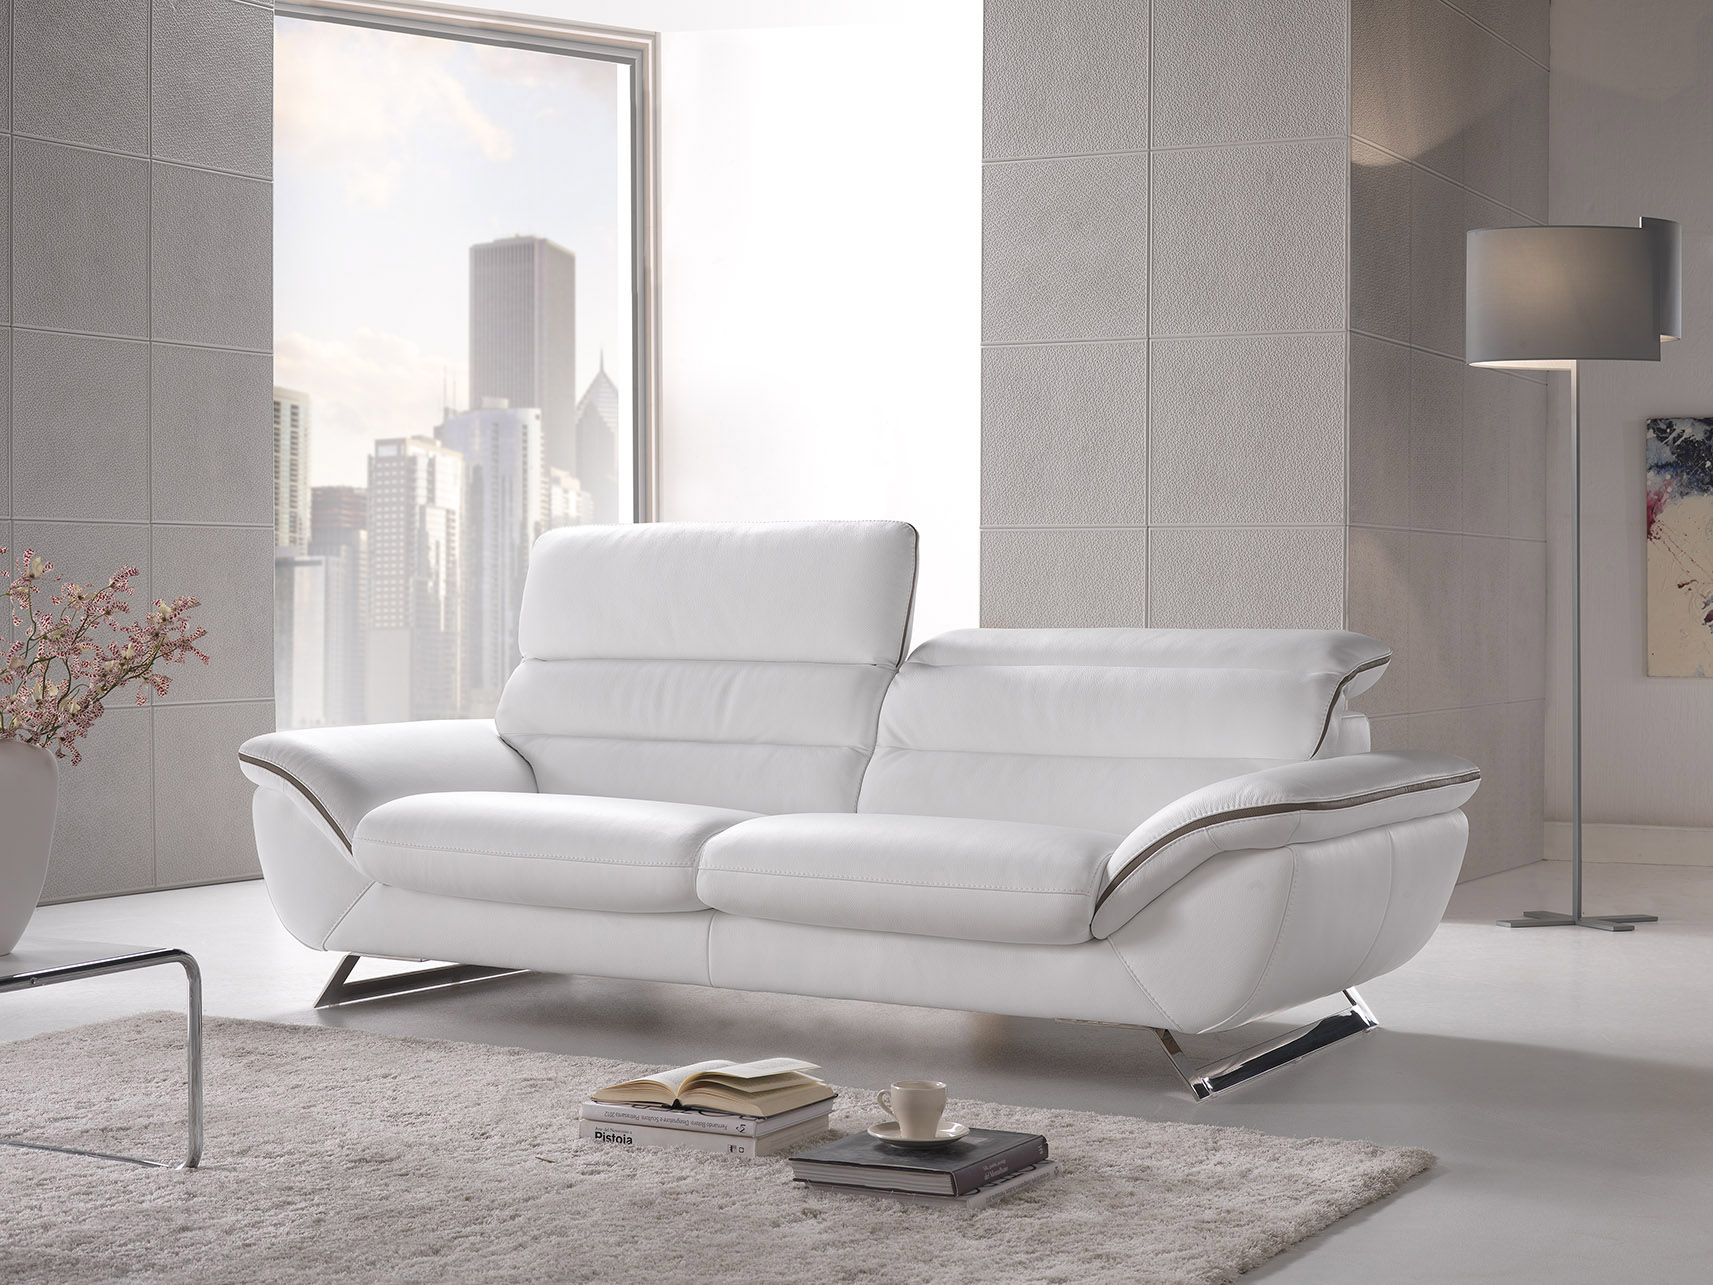 Living Room Furniture Sofas Loveseats and Chairs Cruise Living